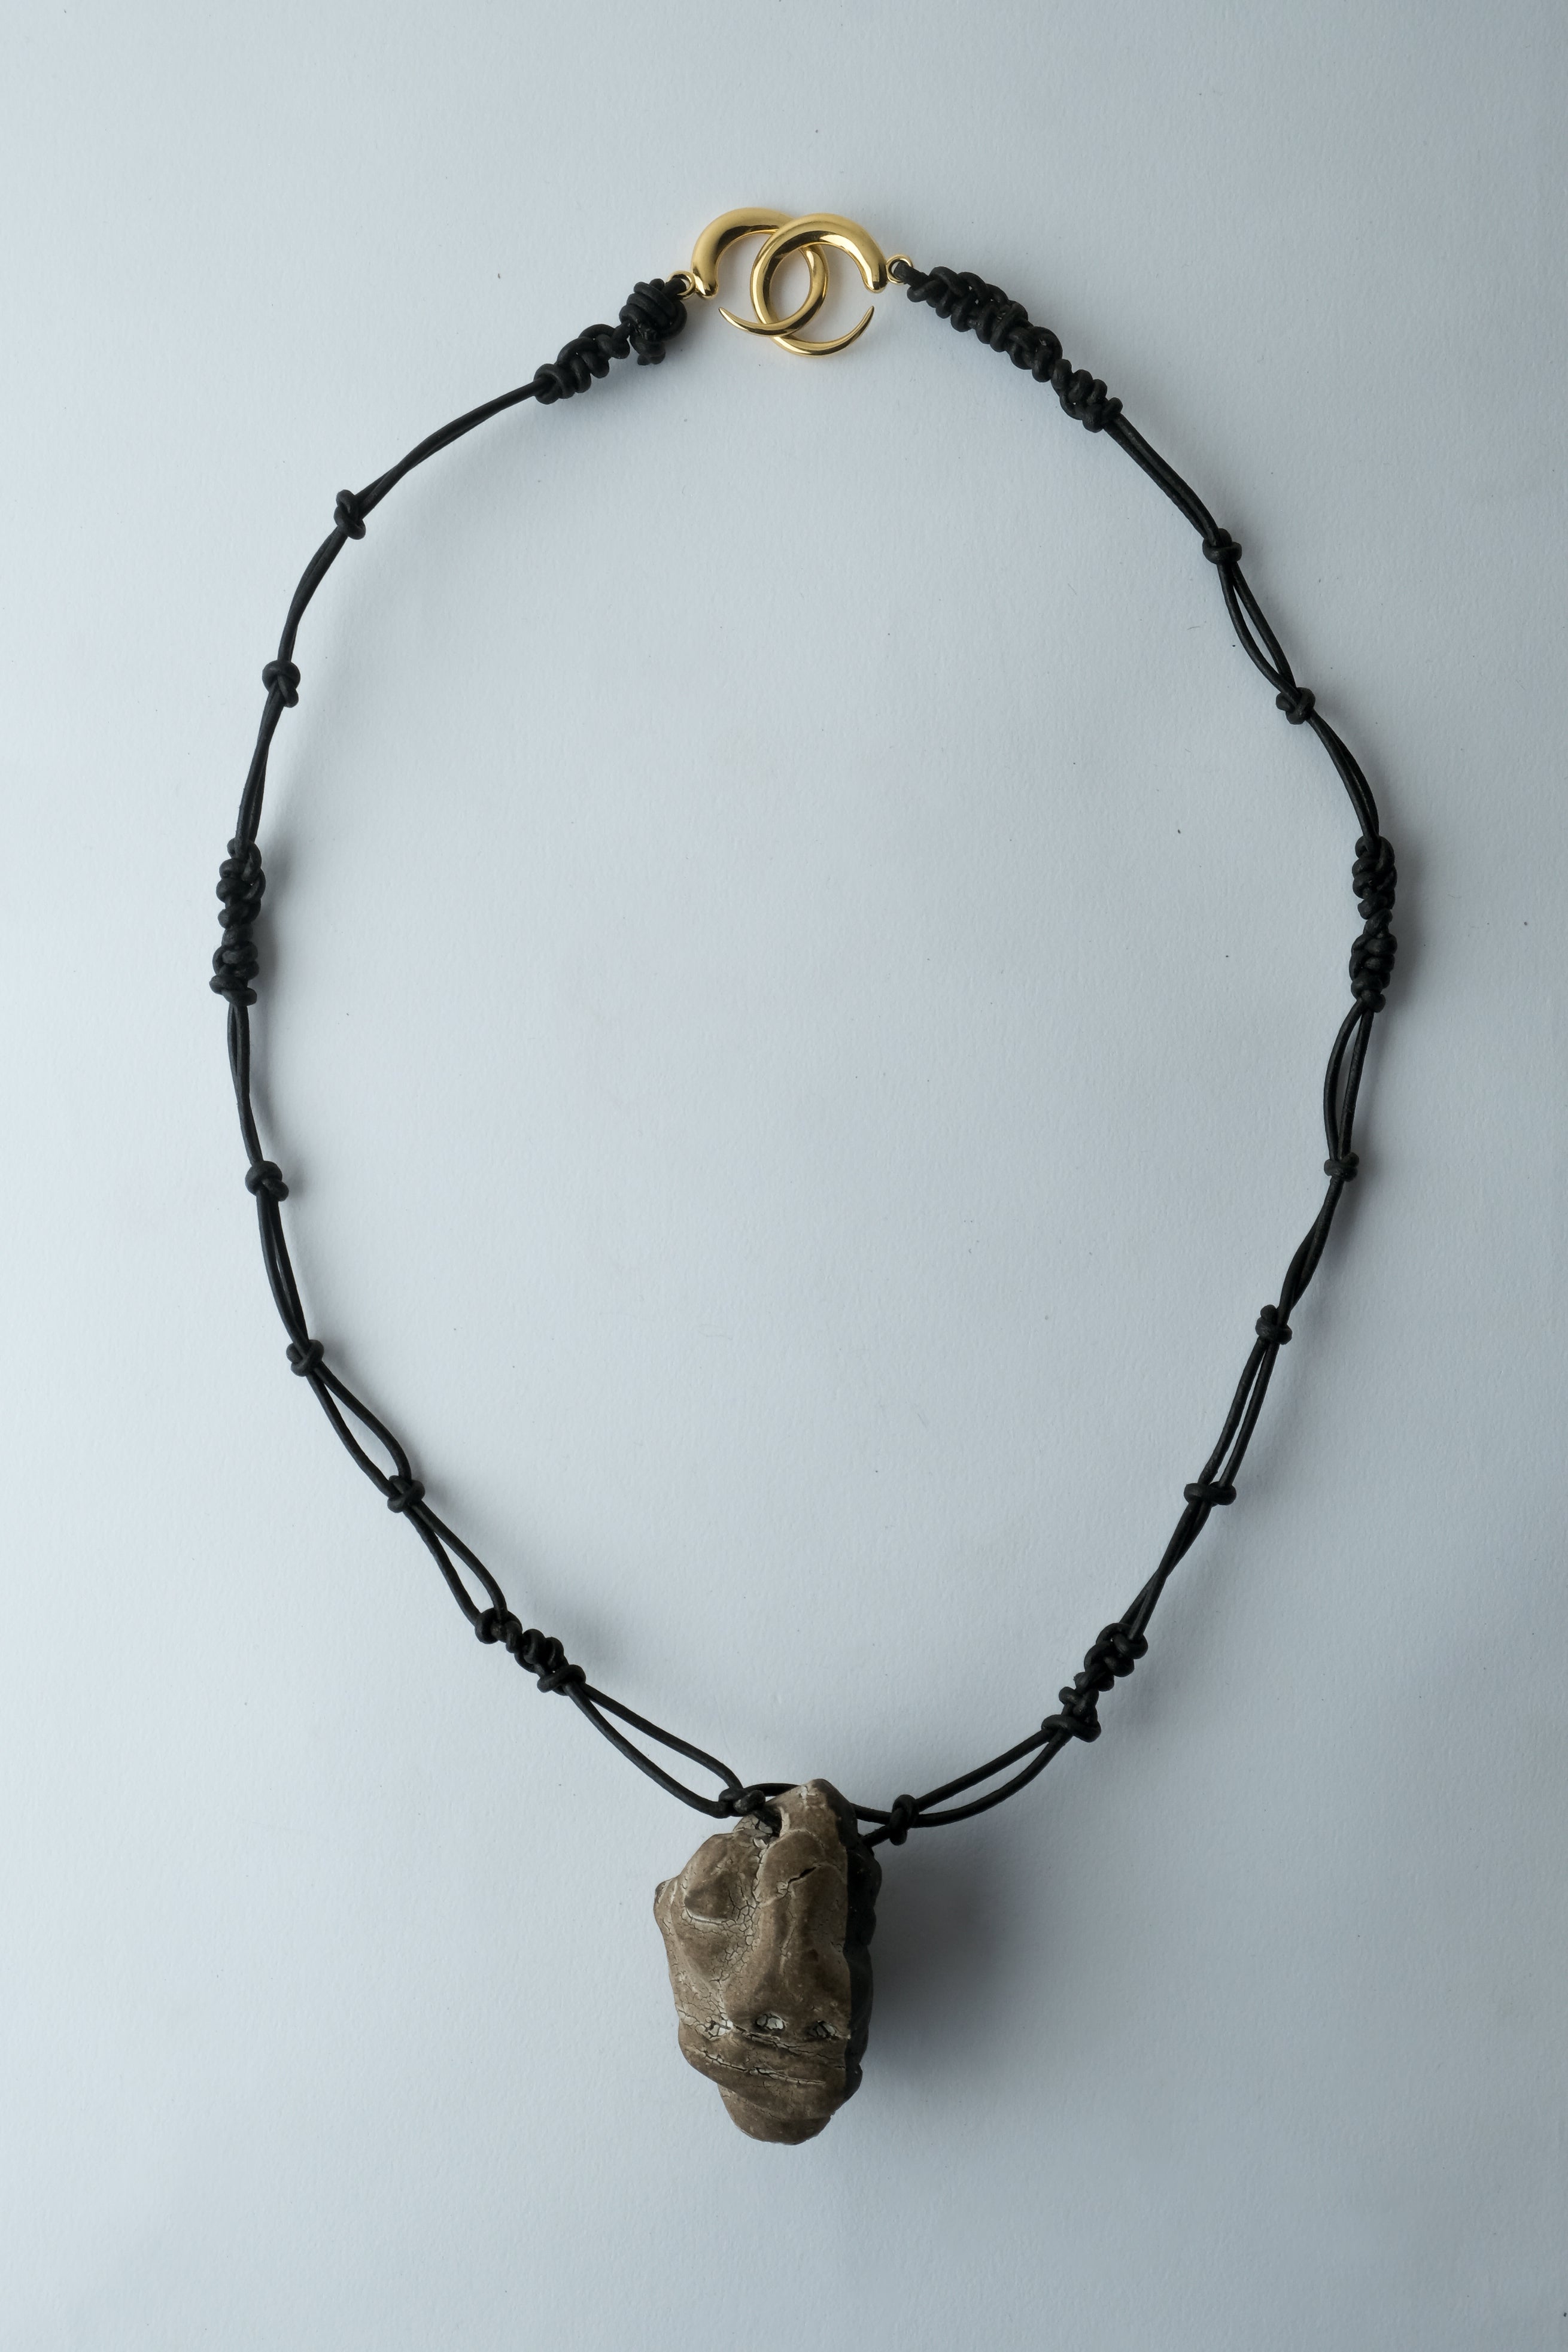 1/1 – Clay Dozer Pendant on Knotted Cord